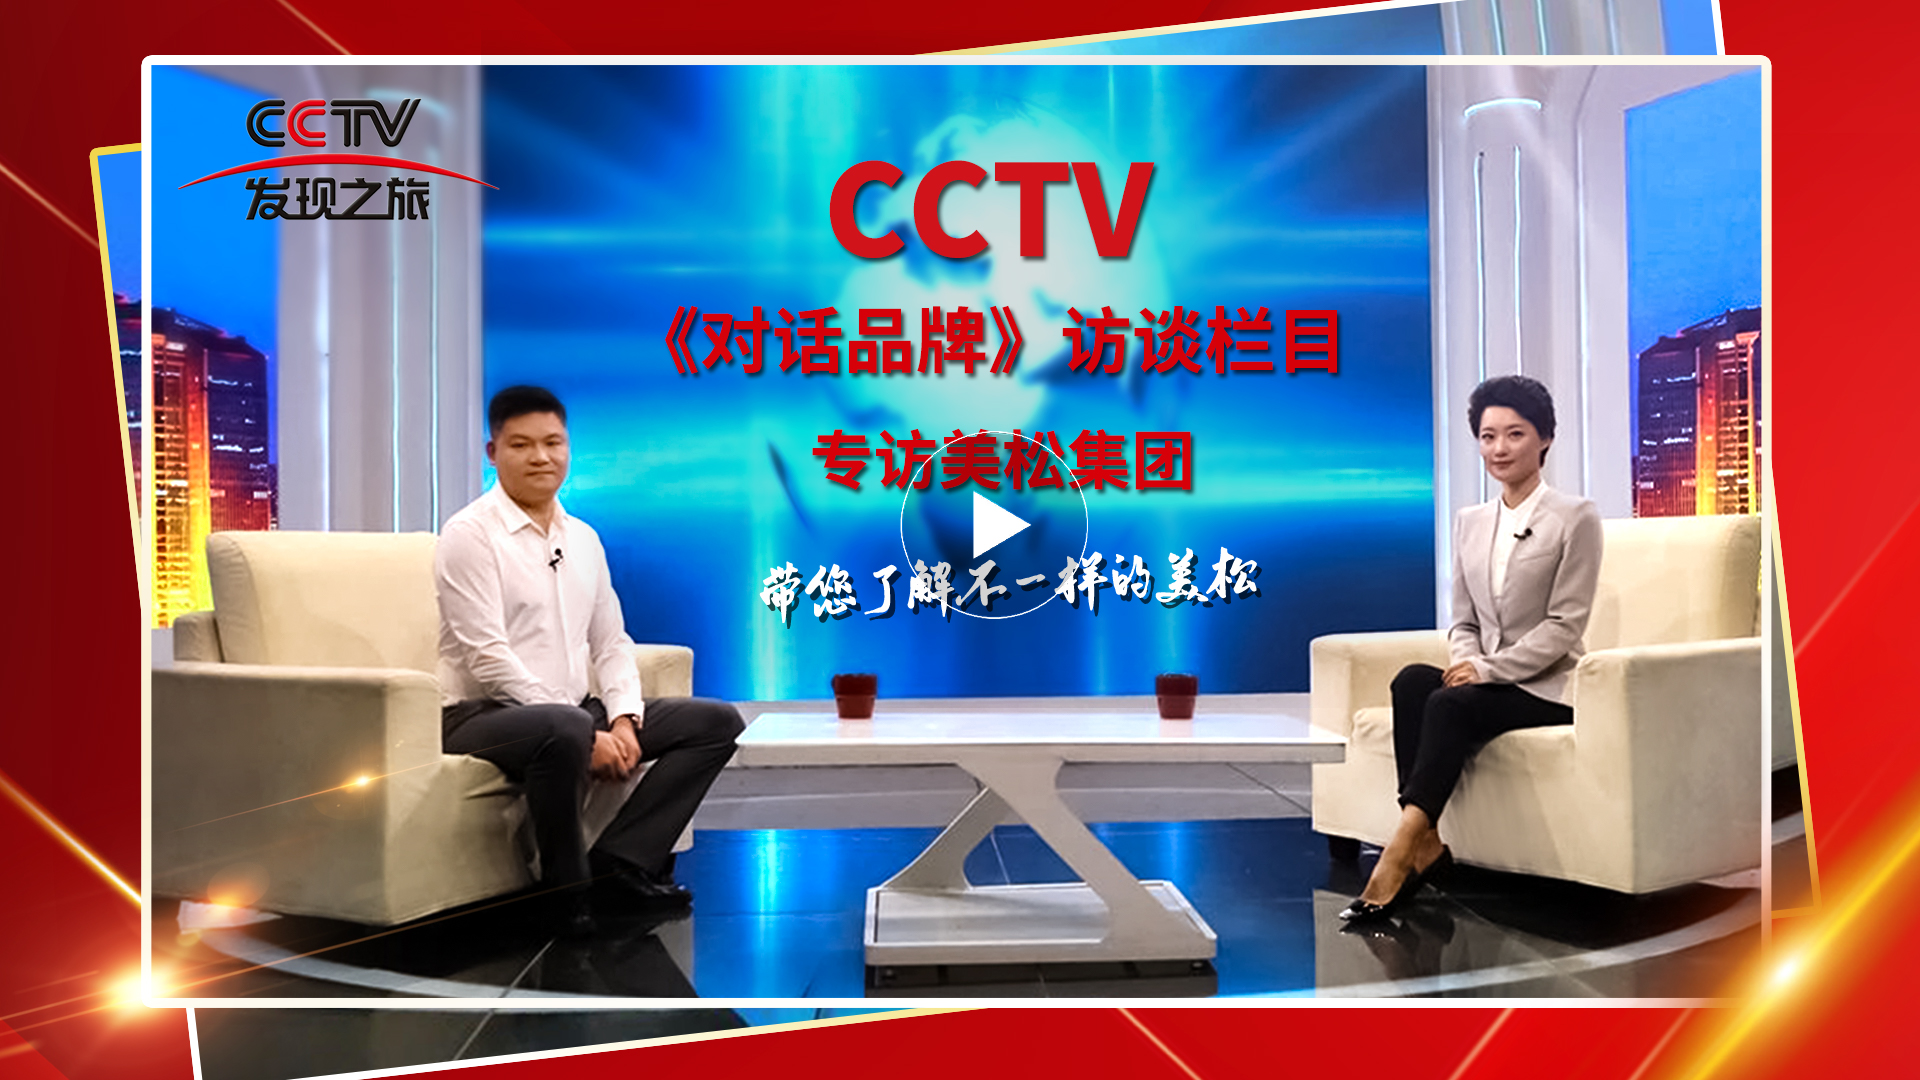 Forge ahead and innovate in science and technology. CCTV's "Dialogue with Brands" column team interviews MASUNG Chairman ChenBin  